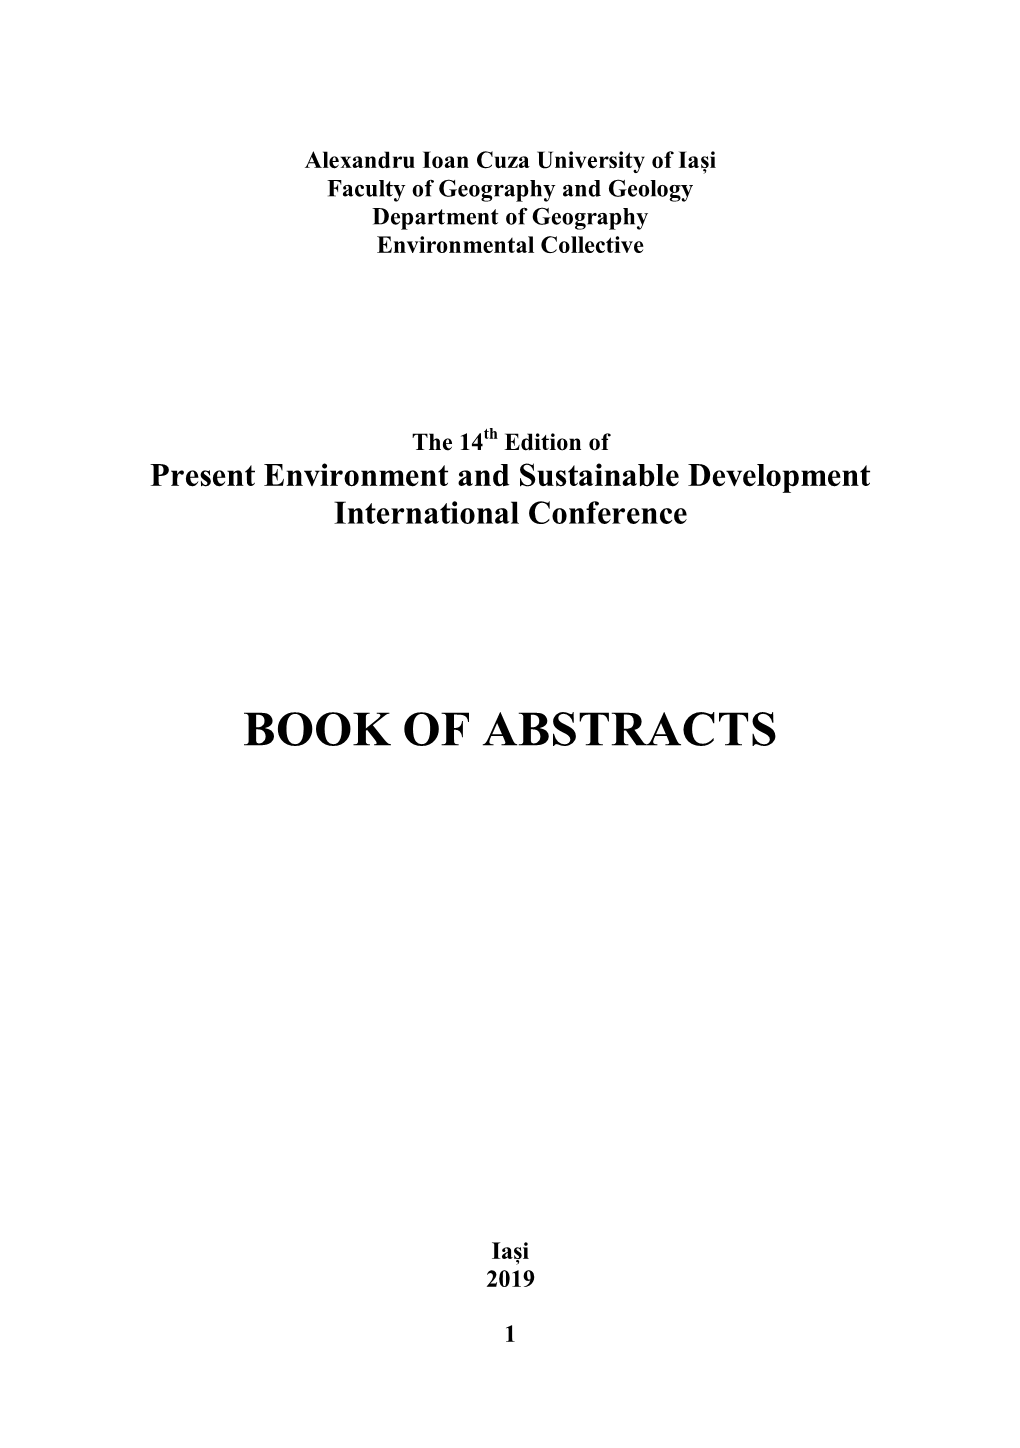 Book-Of-Abstracts-PESD 2019.Pdf